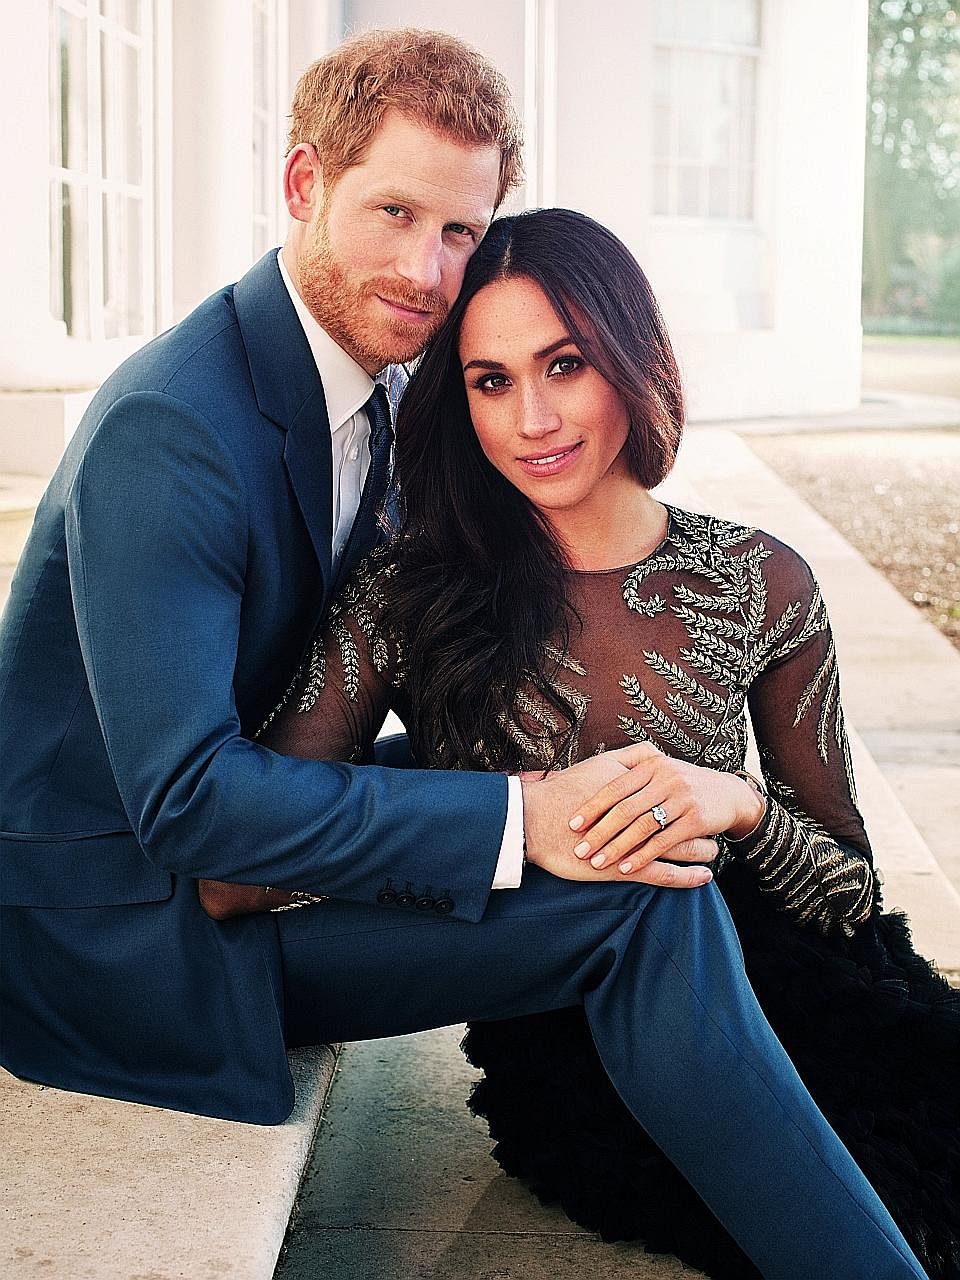 An engagement photo of Britain's Prince Harry and his fiancee, Meghan Markle, shows the latter in a sheer top.